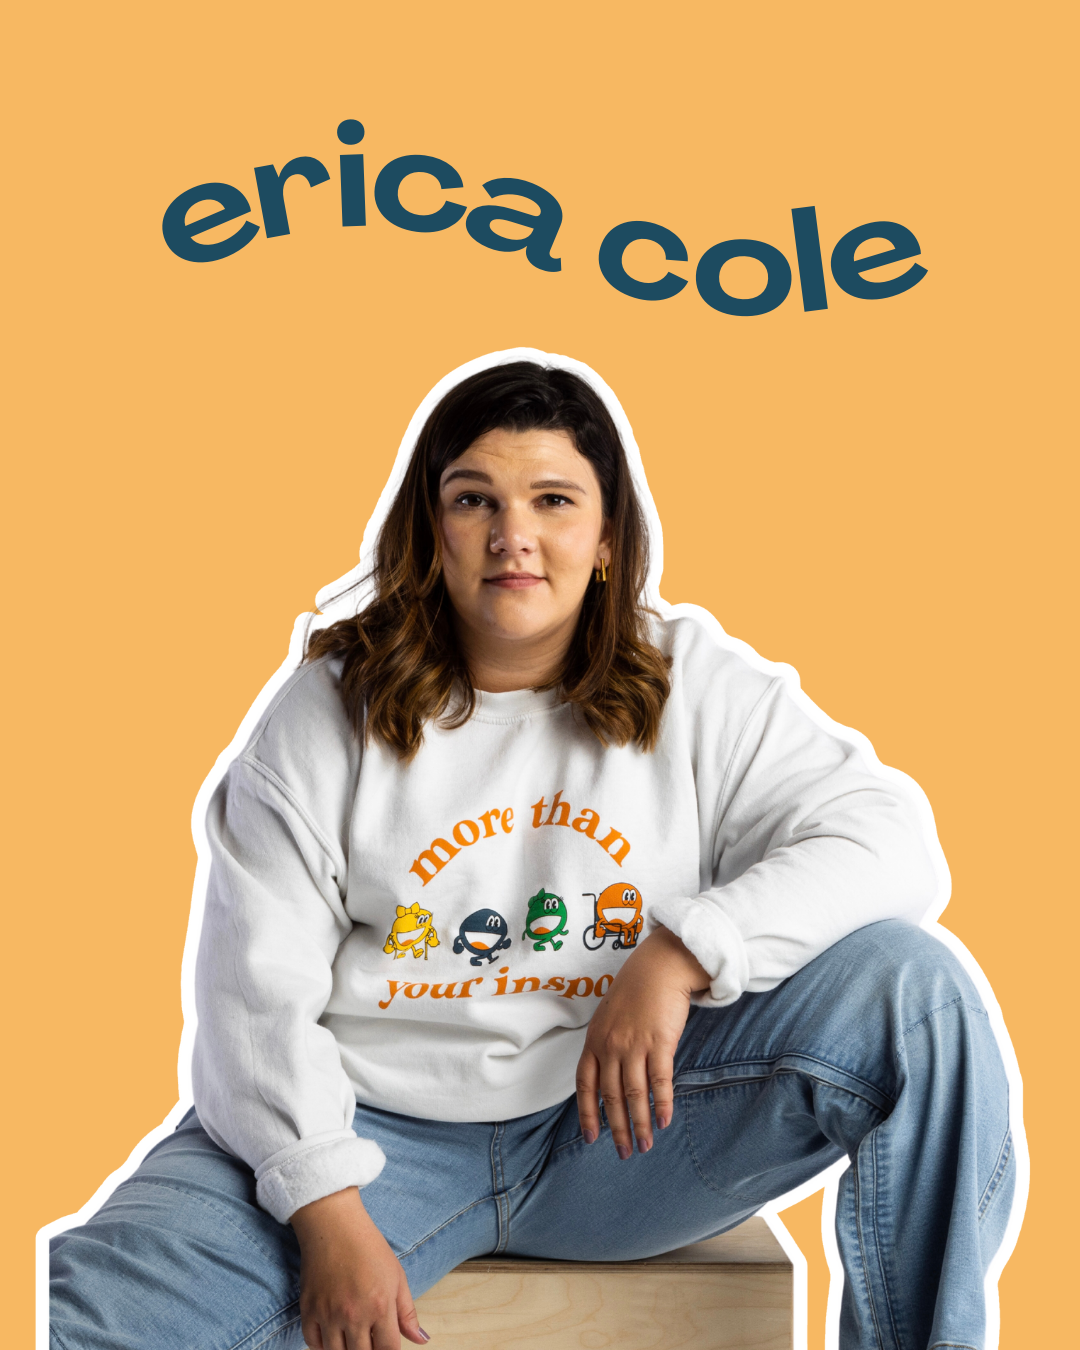 An image of a woman wearing a white long sleeve and jeans, with a yellow background behind her. There is navy blue lettering above that says "erica cole"